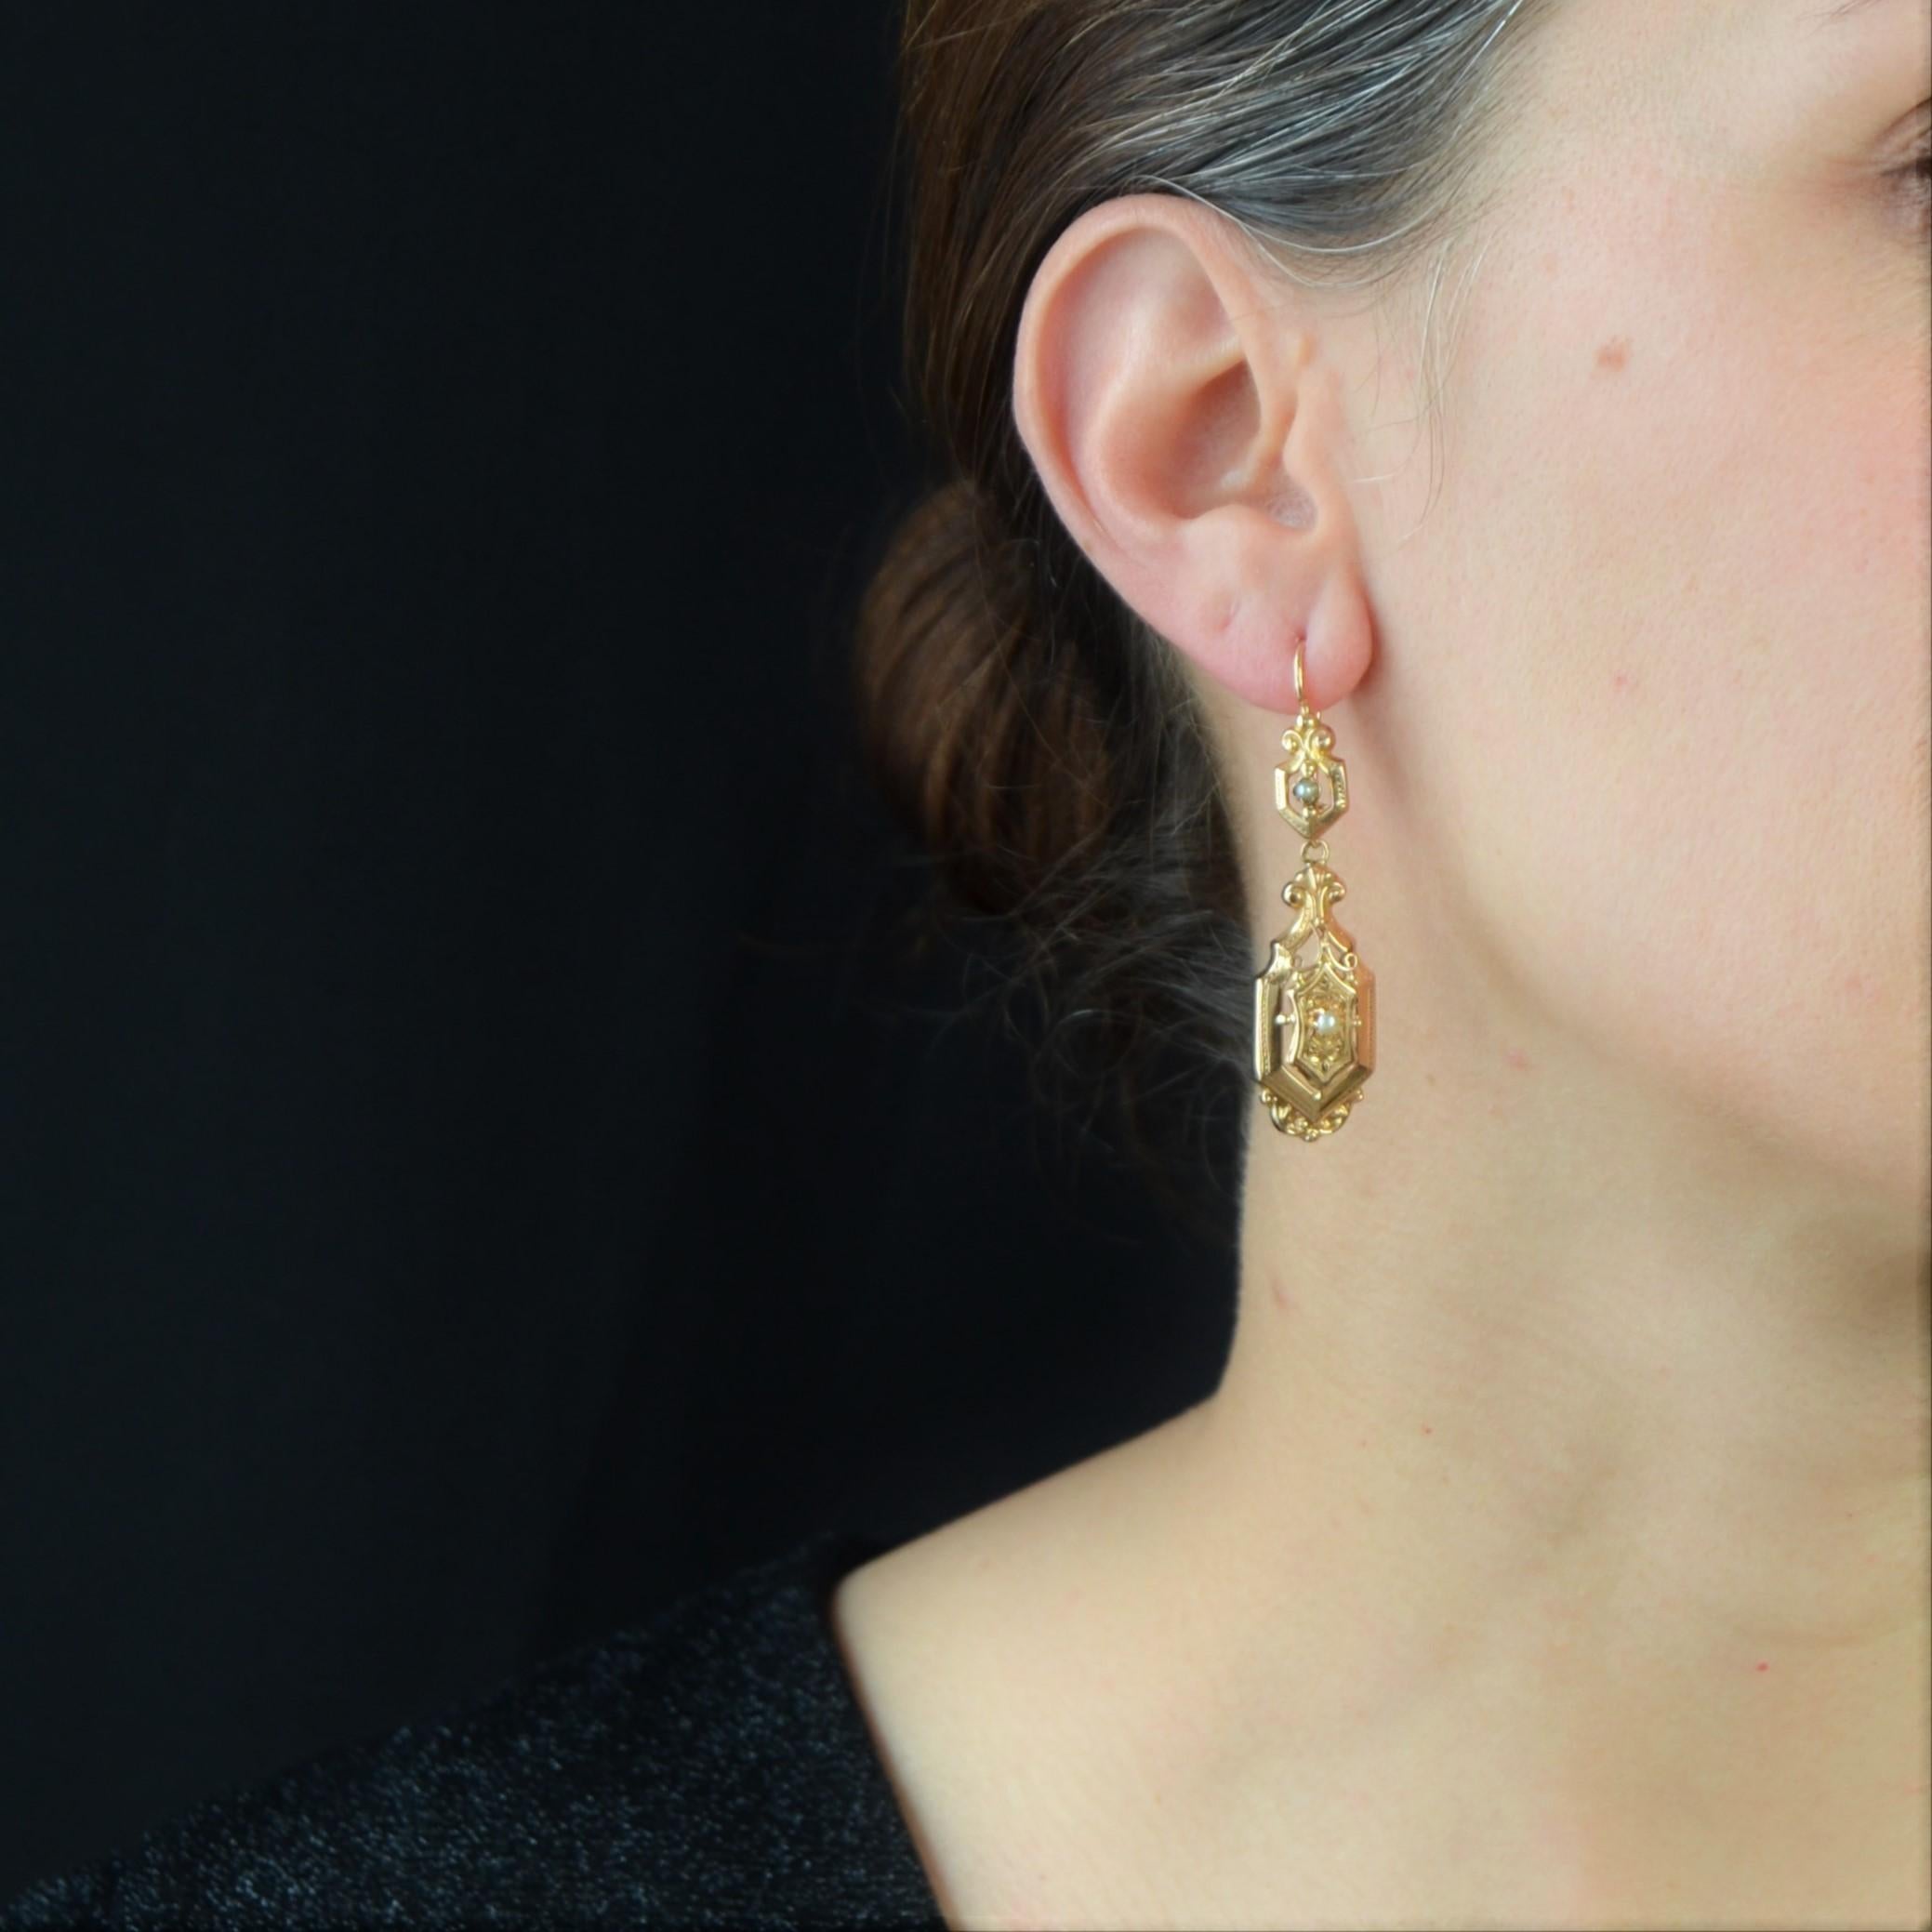 For pierced ears.
Pair of earrings in 18 karat rose gold, eagle head and horse head hallmarks.
Lovely earrings, they are made of a diamond-shaped openwork, chiseled, decorated in the center of a half pearl and topped by an arabesque. This pattern